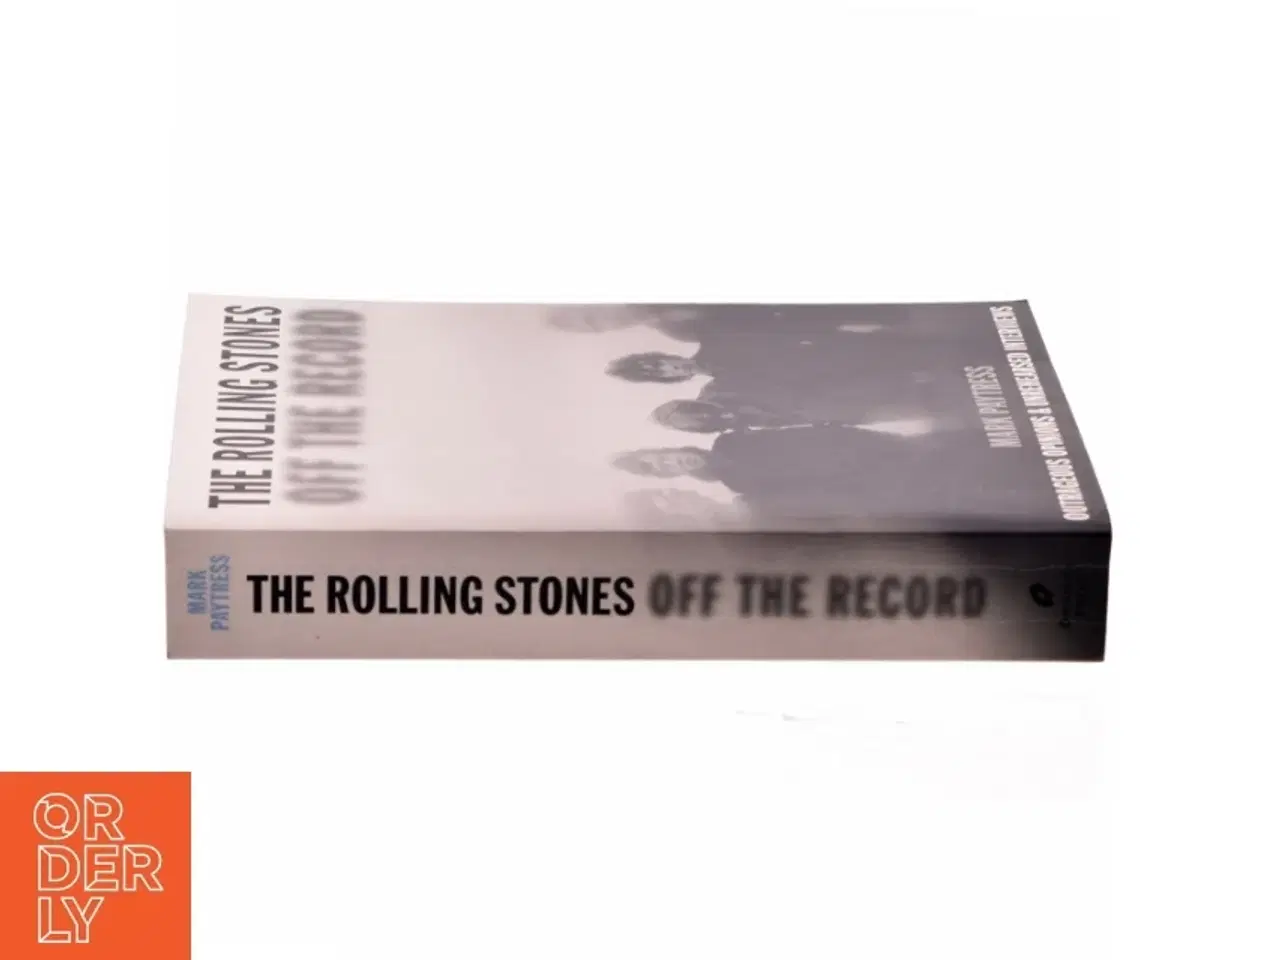 Billede 2 - The Rolling Stones, off the record af Mark Paytress